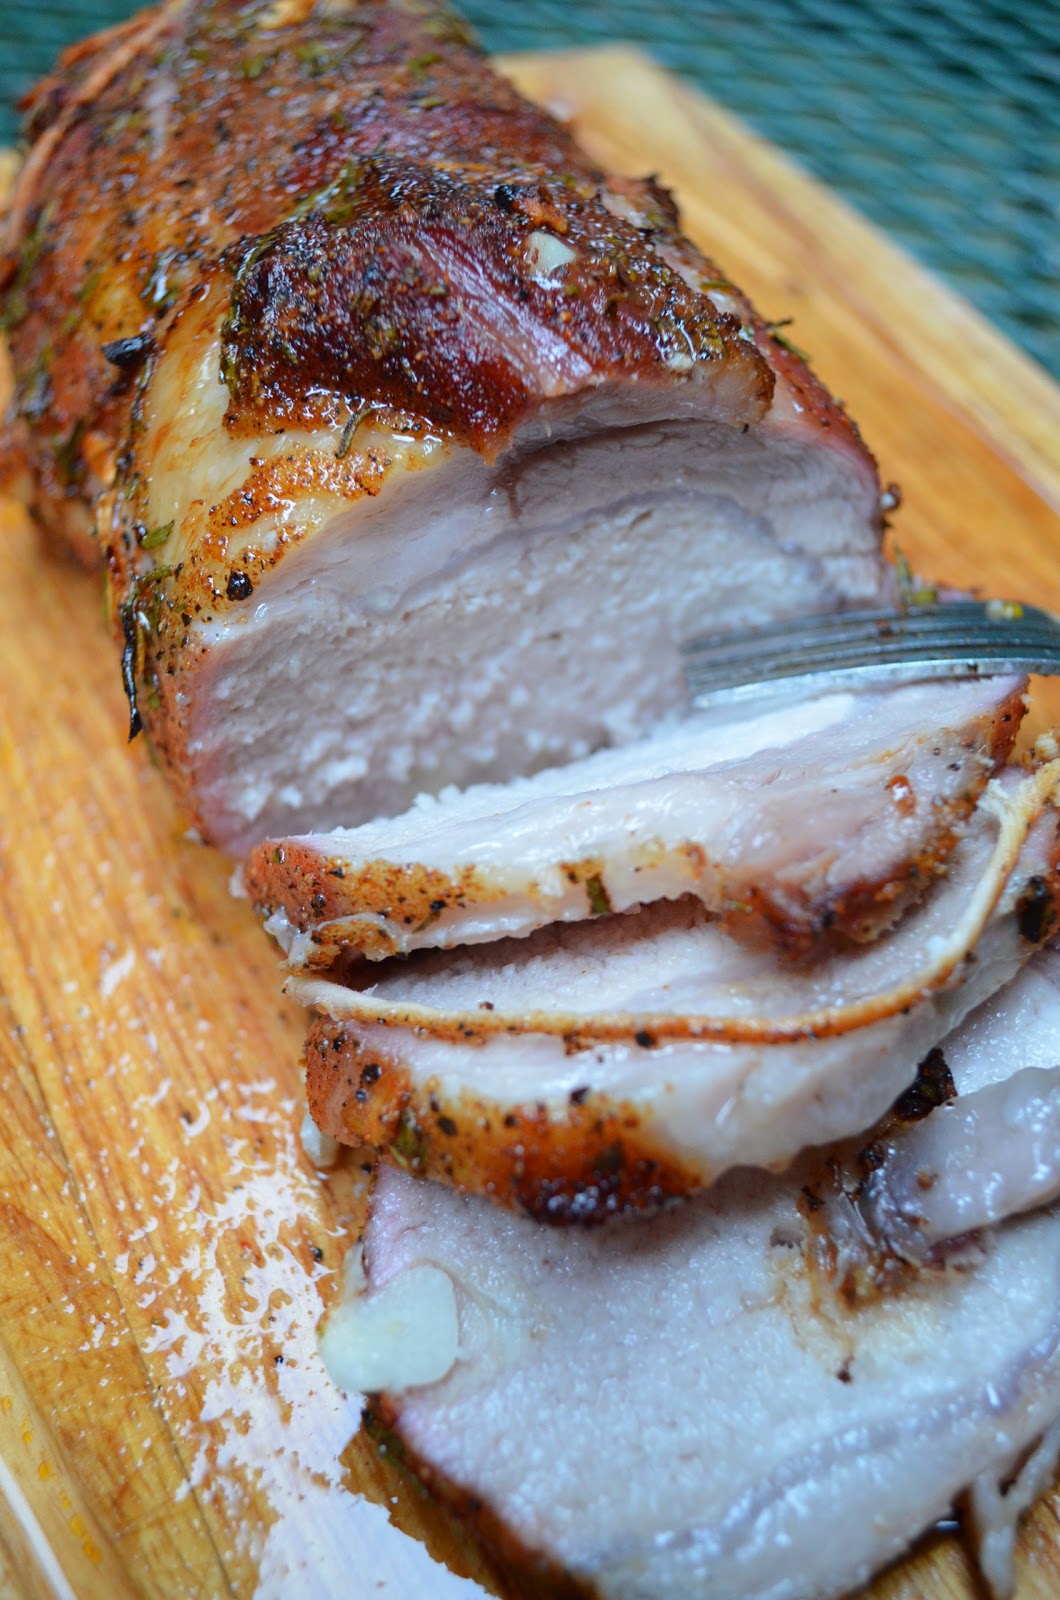 amour fou(d): roast pork with garlic and rosemary.